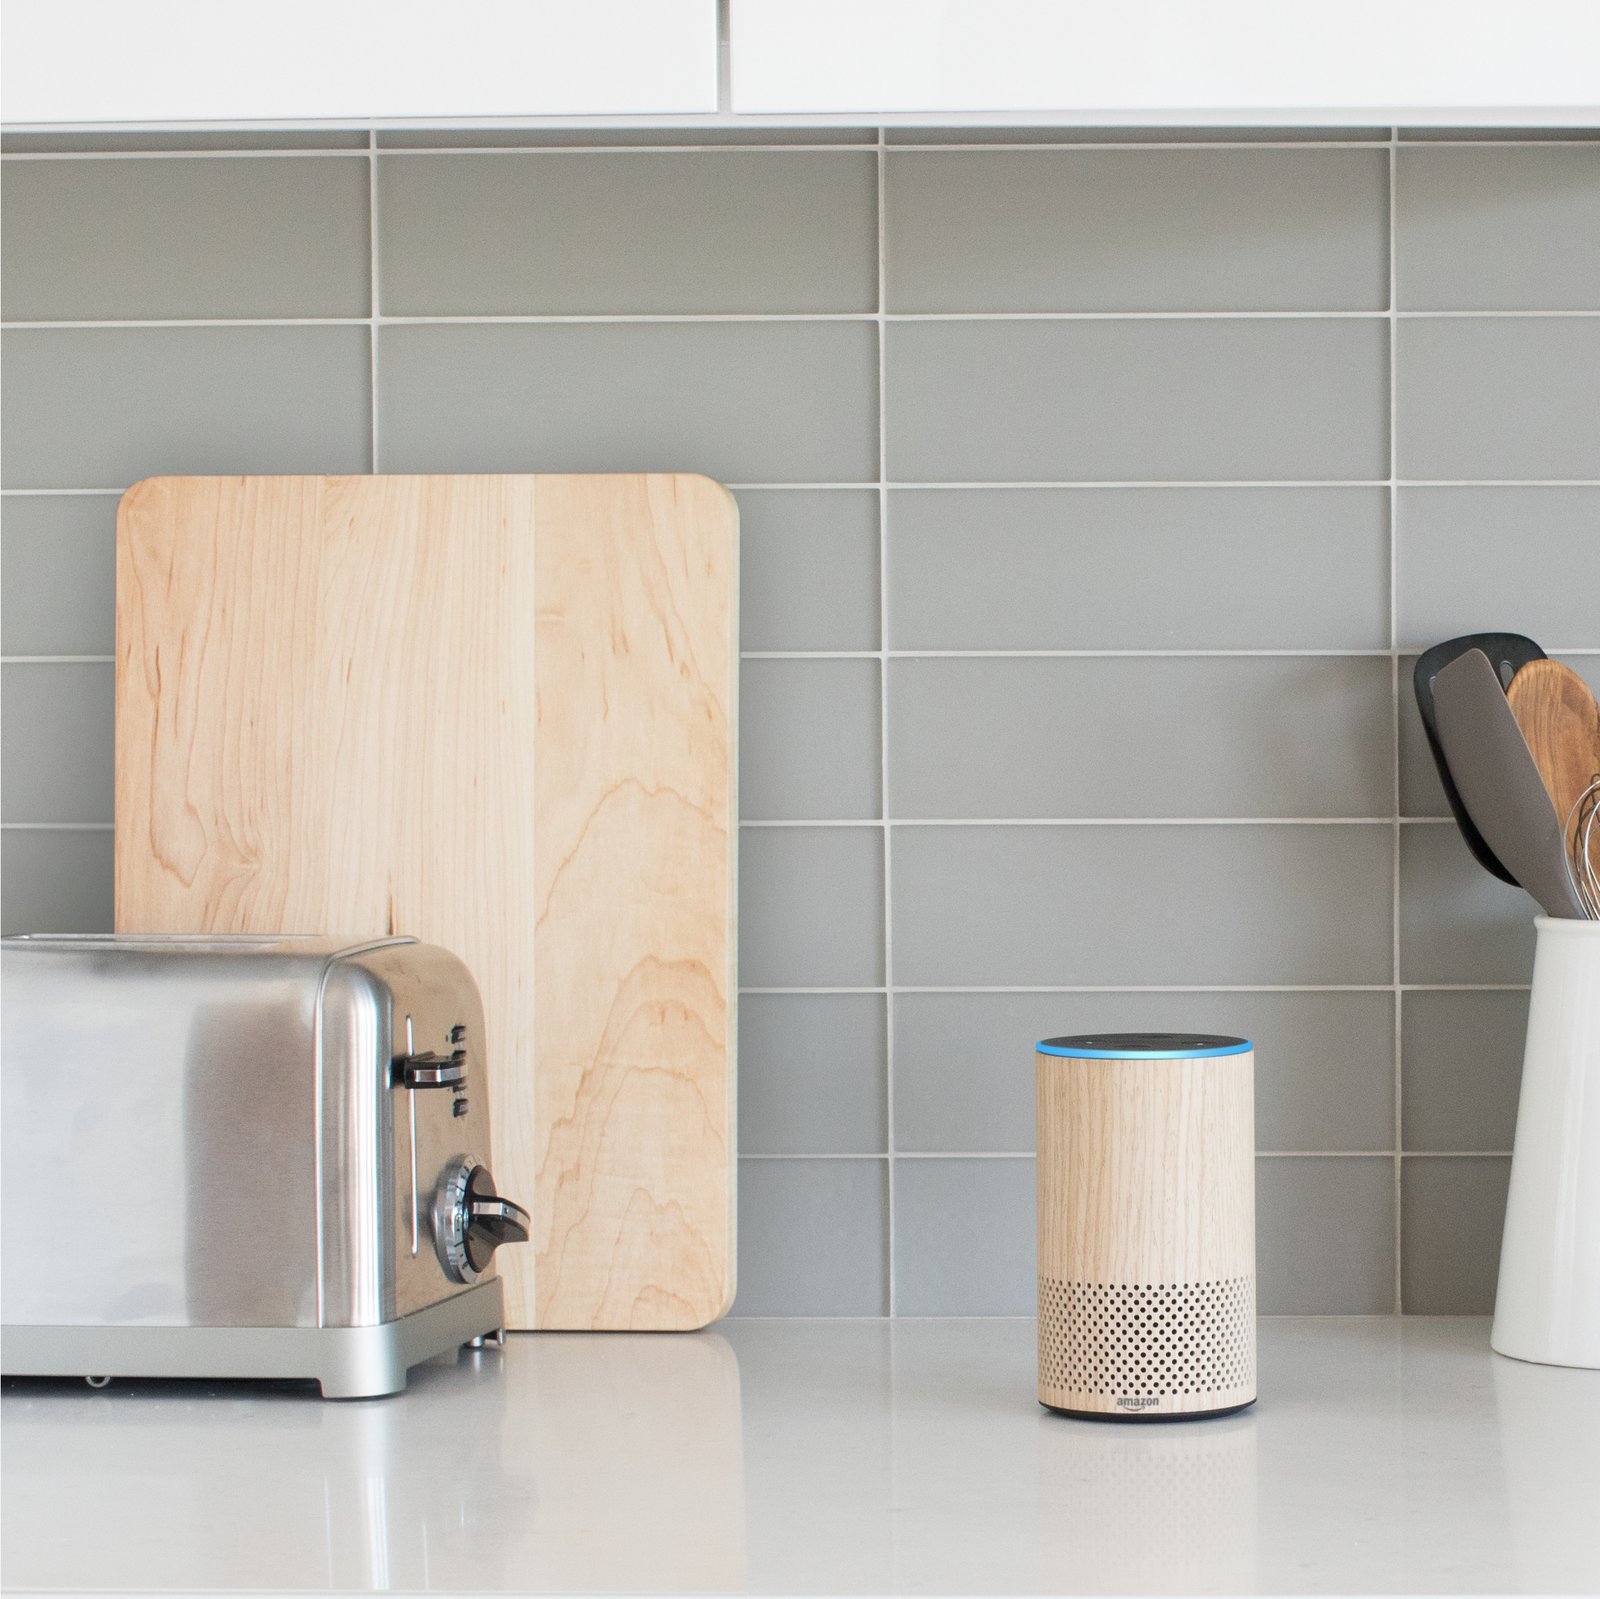 8 Smart Gadgets to Supercharge Your Kitchen